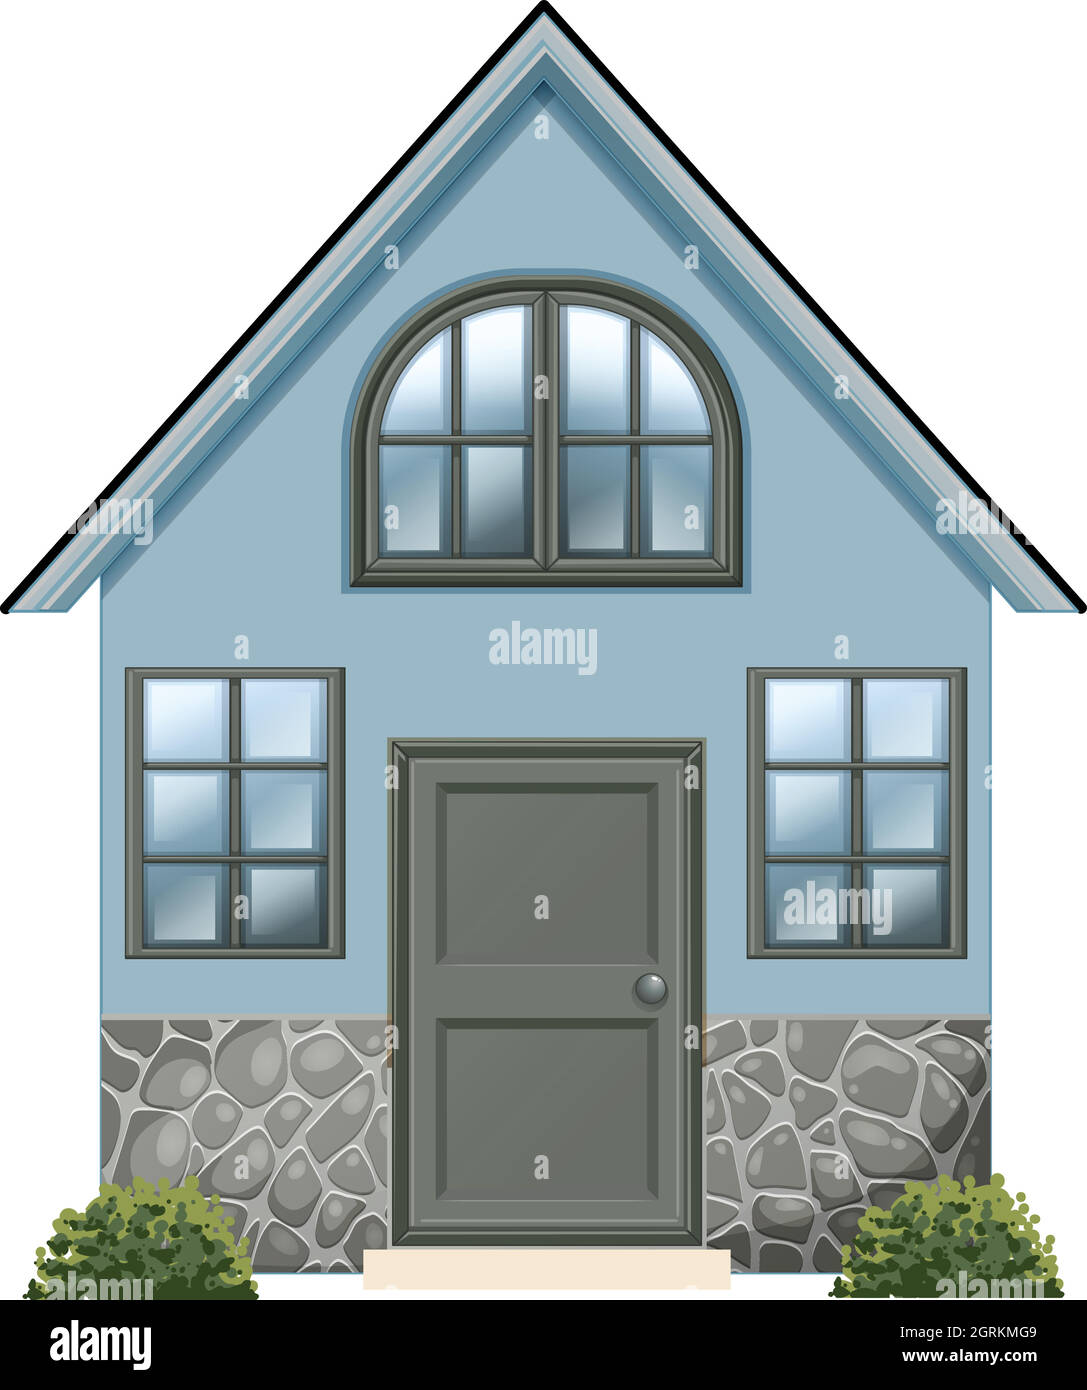 A simple single detached house Stock Vector